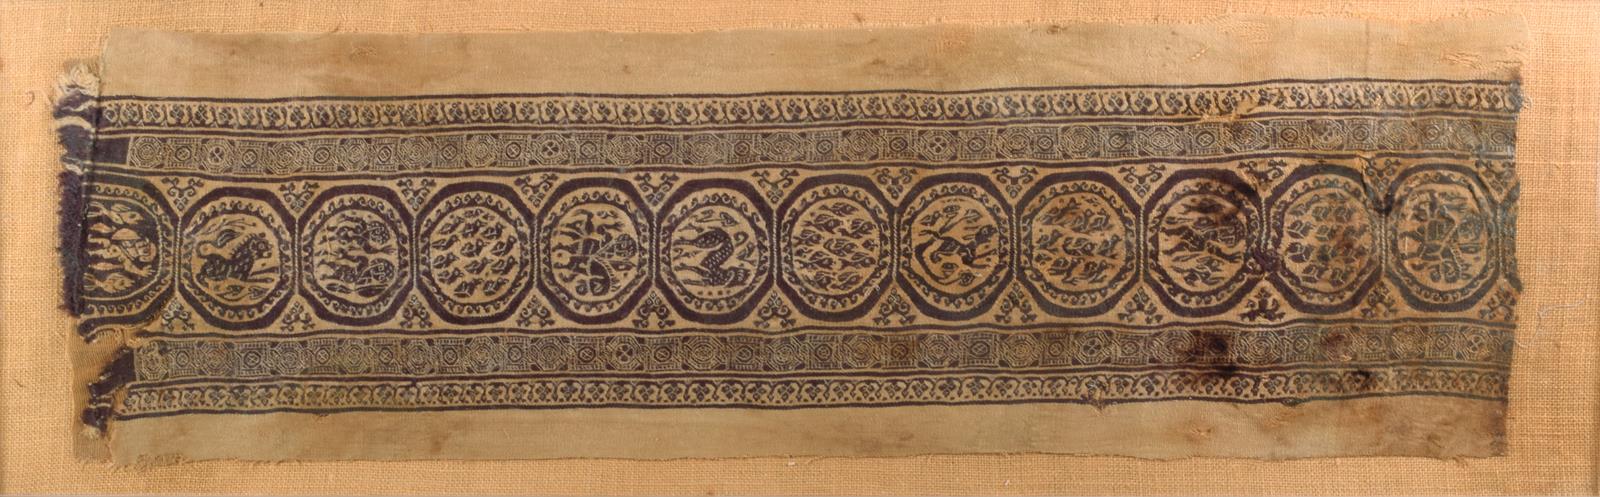 An Egyptian Coptic textile fragment, linen and wool, with a central band of roundels depicting